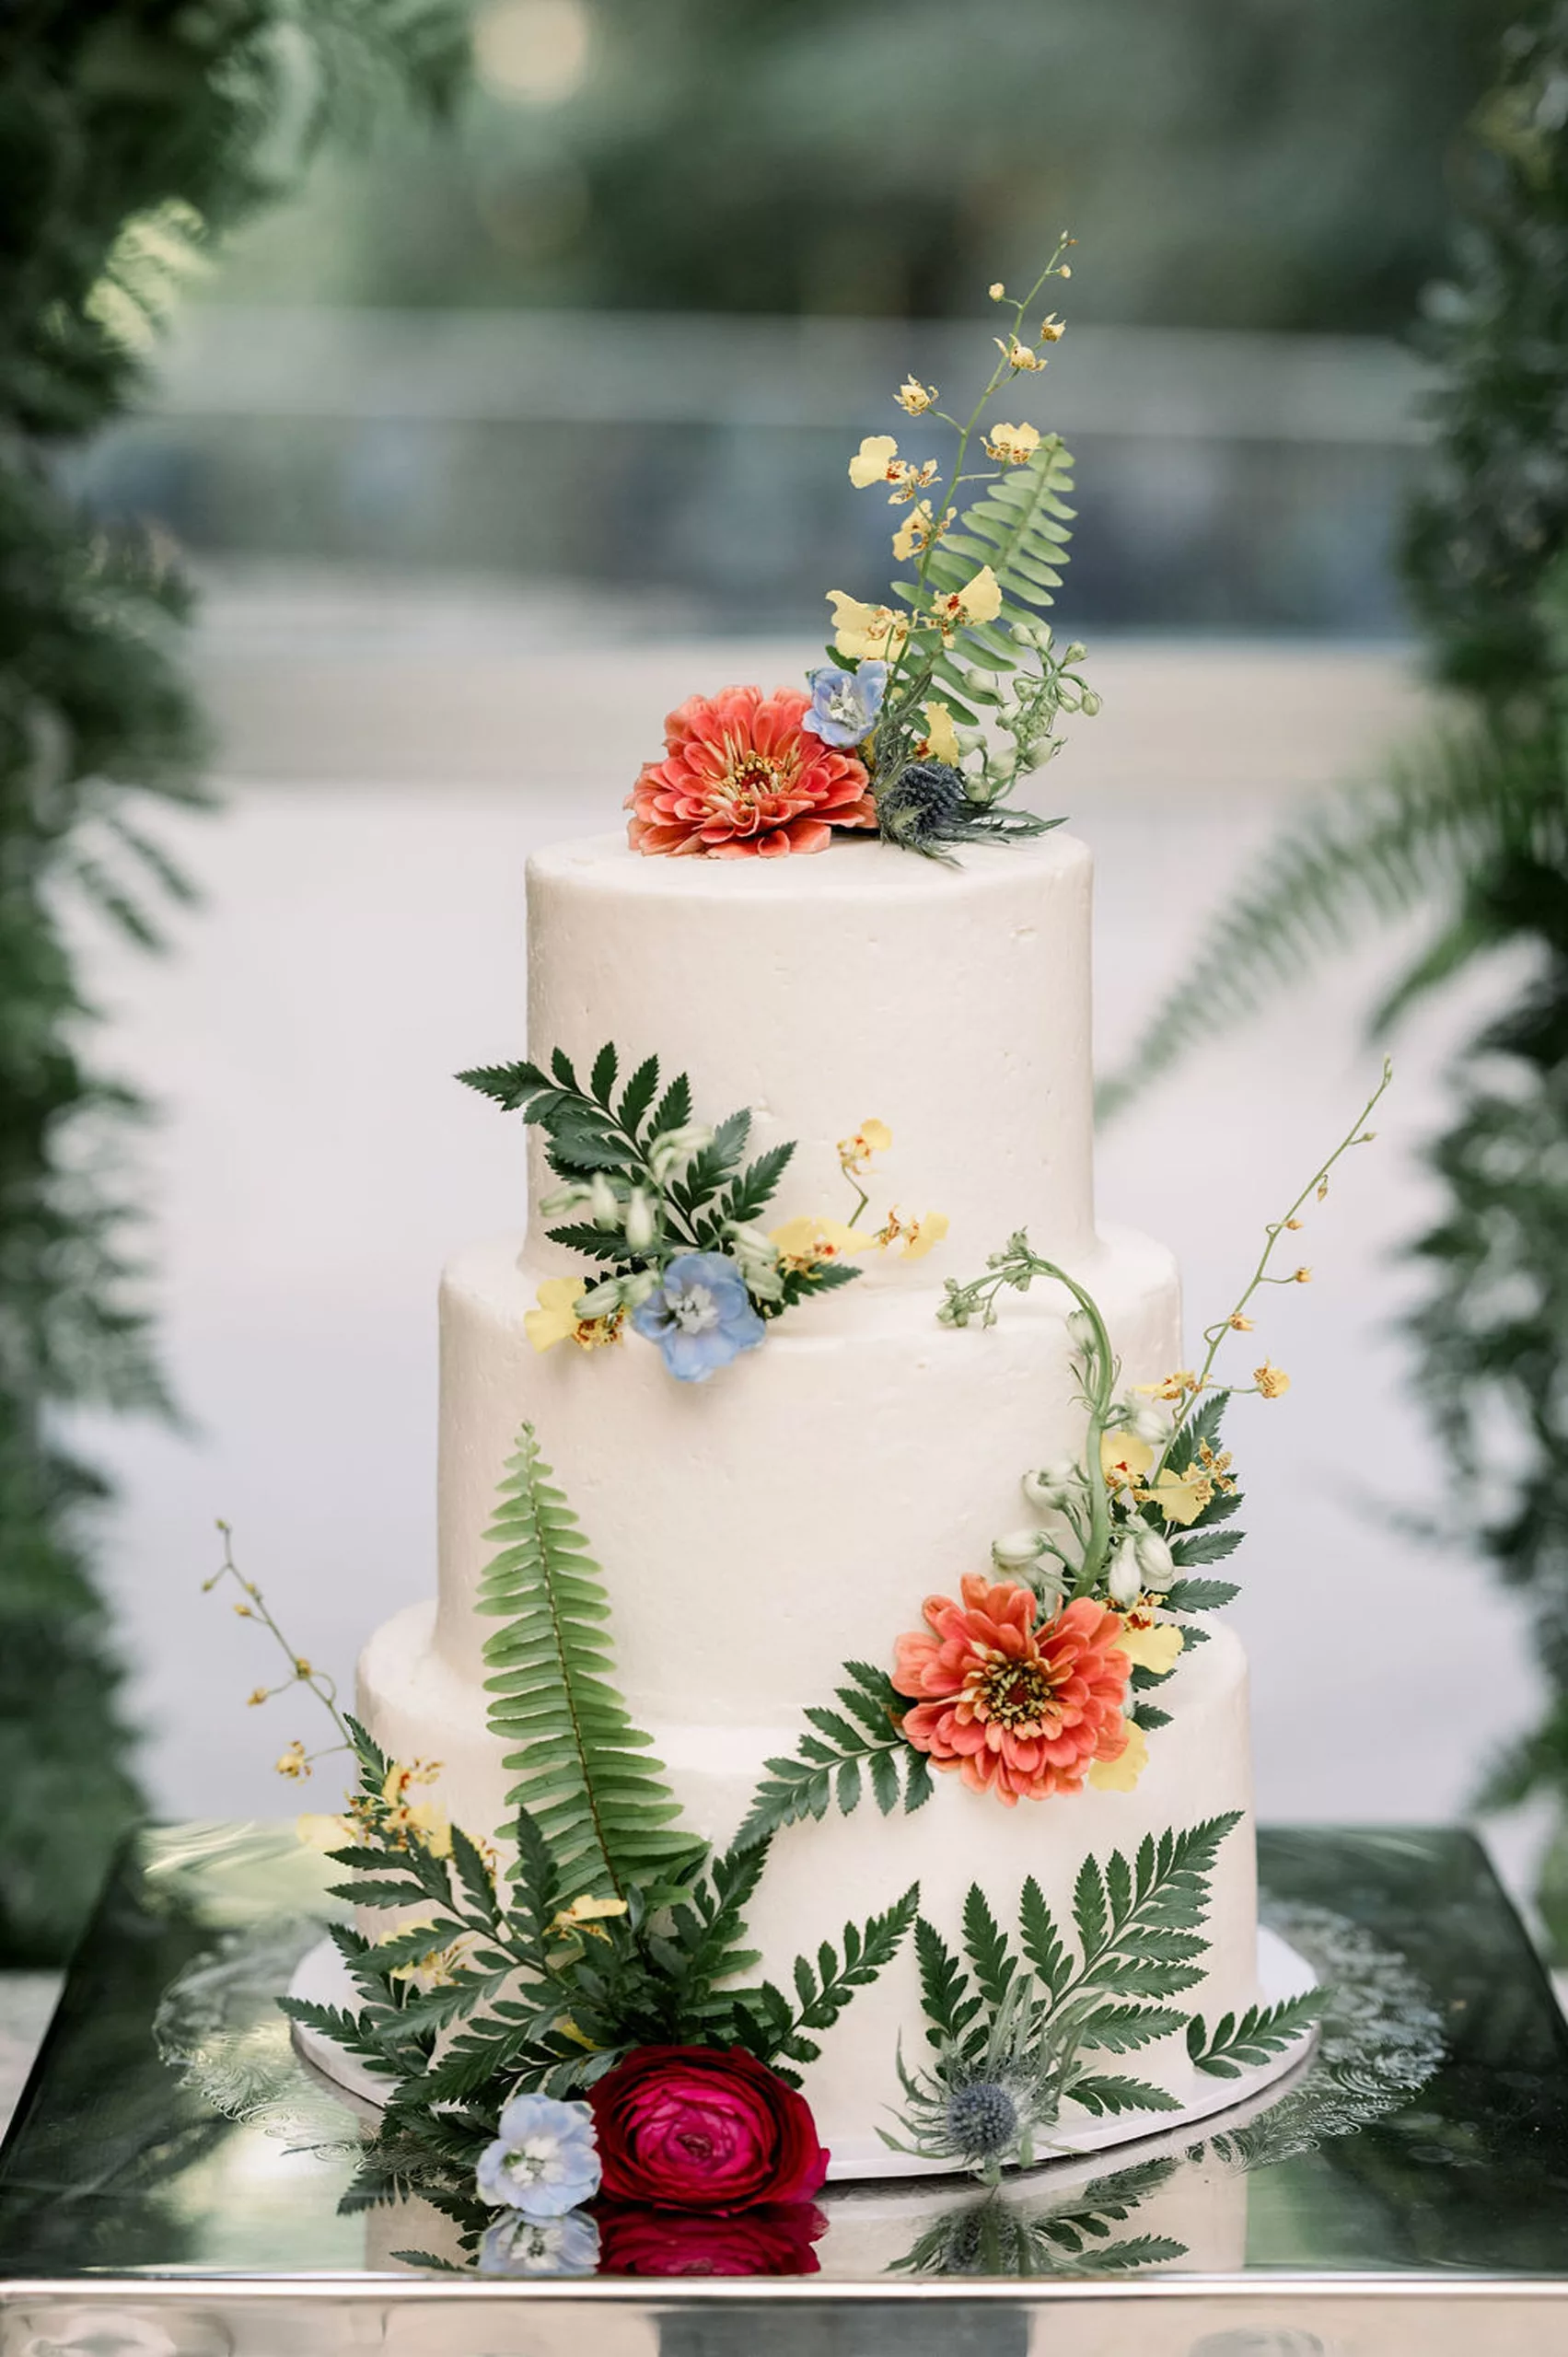 Details of a dinosaur theme cake with ferns and colorful flowers